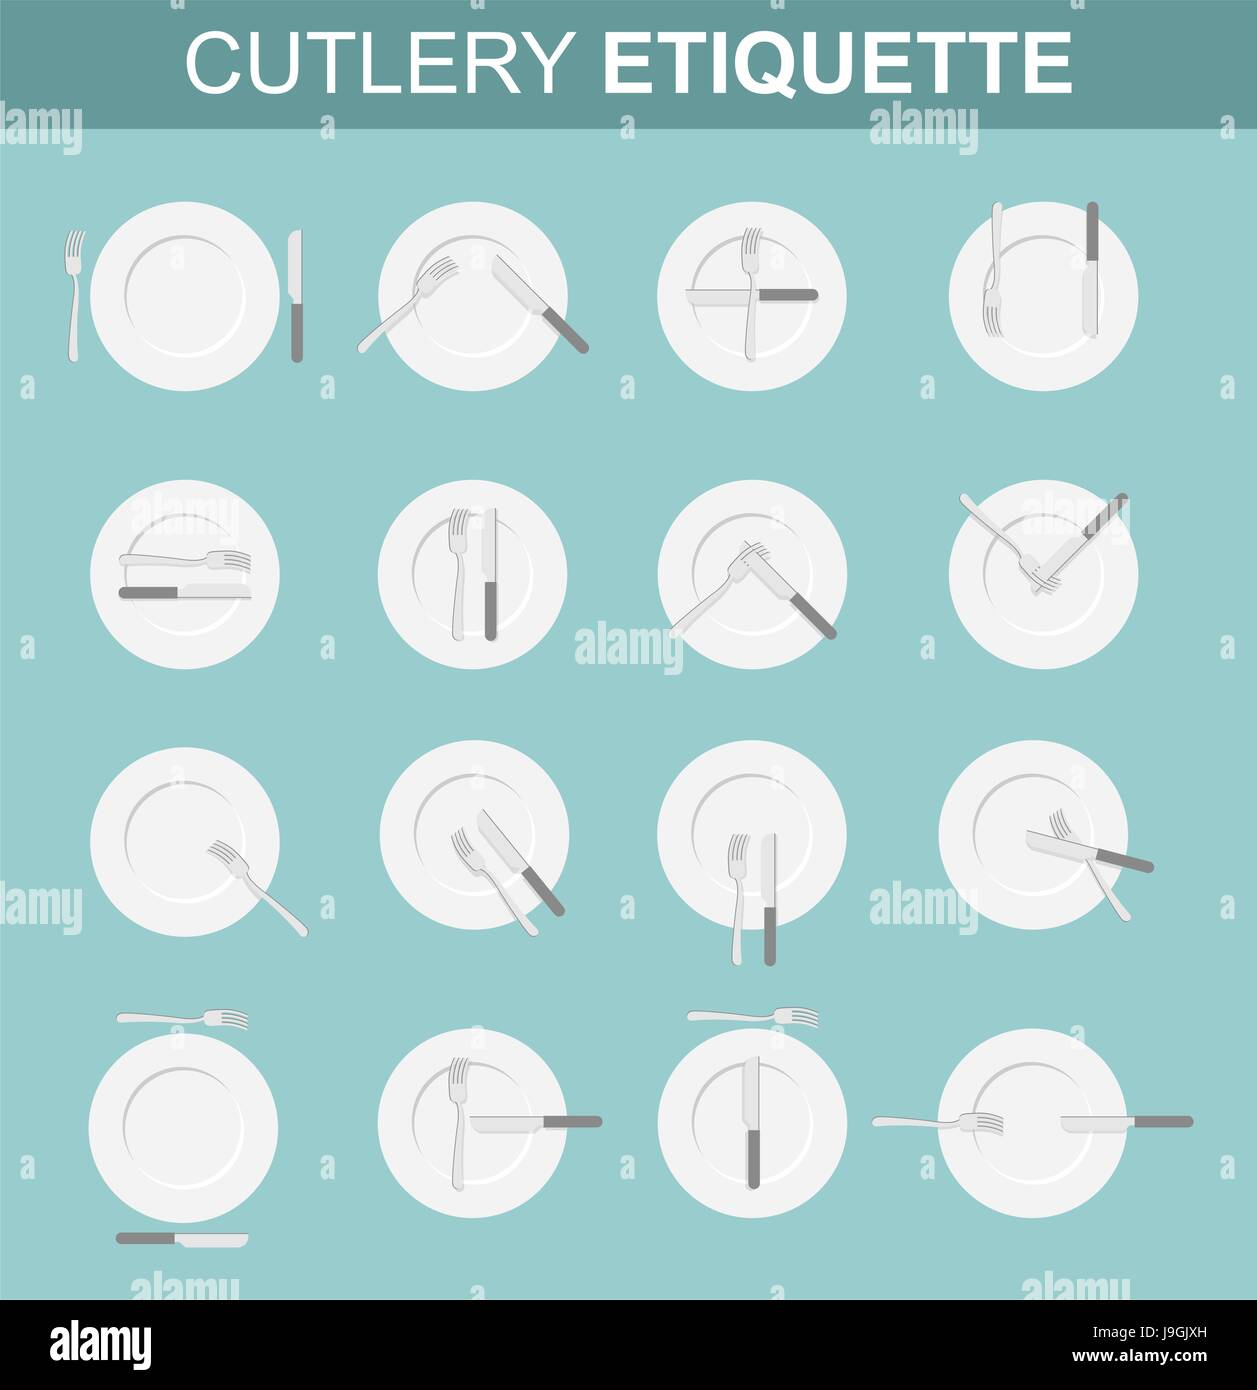 Cutlery etiquette. Dining etiquette. Set various options for location of plugs and knife on plate in restaurant. Restaurant etiquette. Rules of conduc Stock Vector